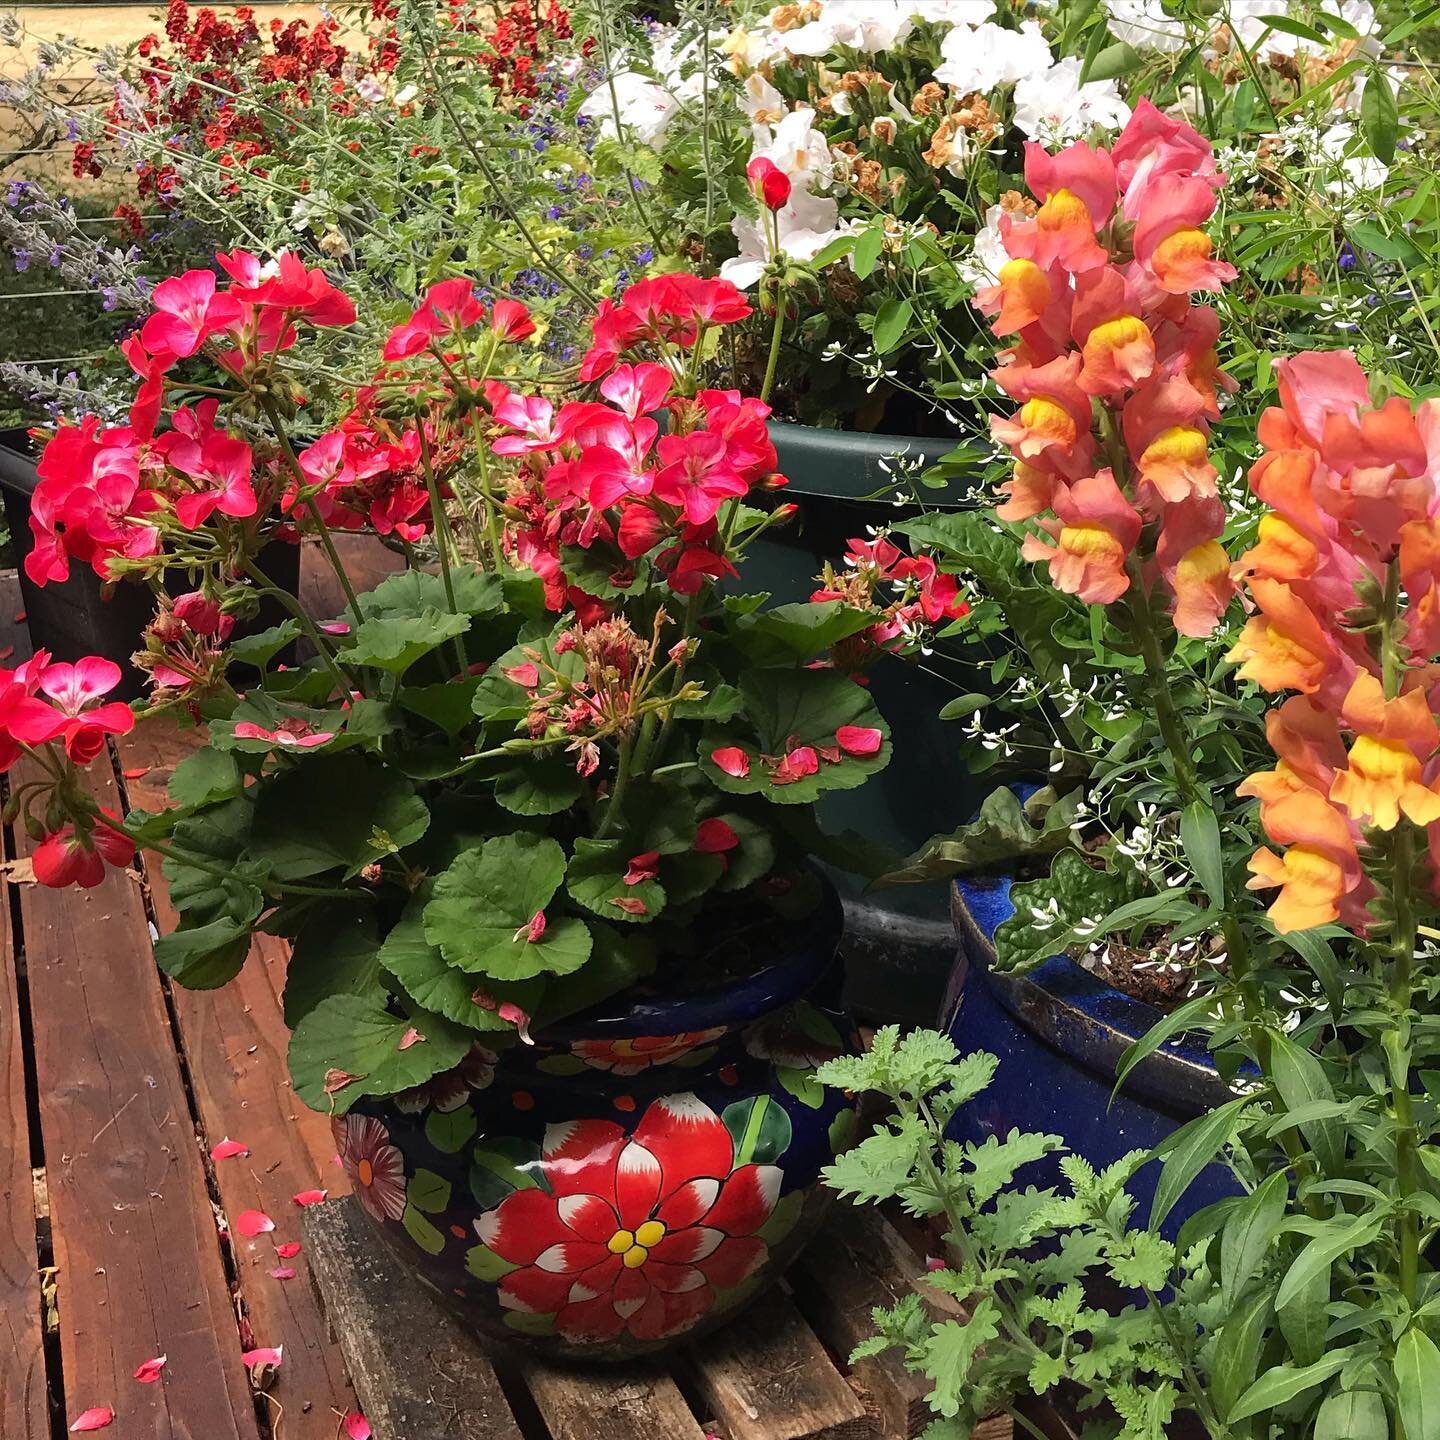 My mother&rsquo;s deck garden is peaking!  I love these red and white flowers in the pot with painted red and white flowers! Artistry comes in many forms ❤️🌺🌞